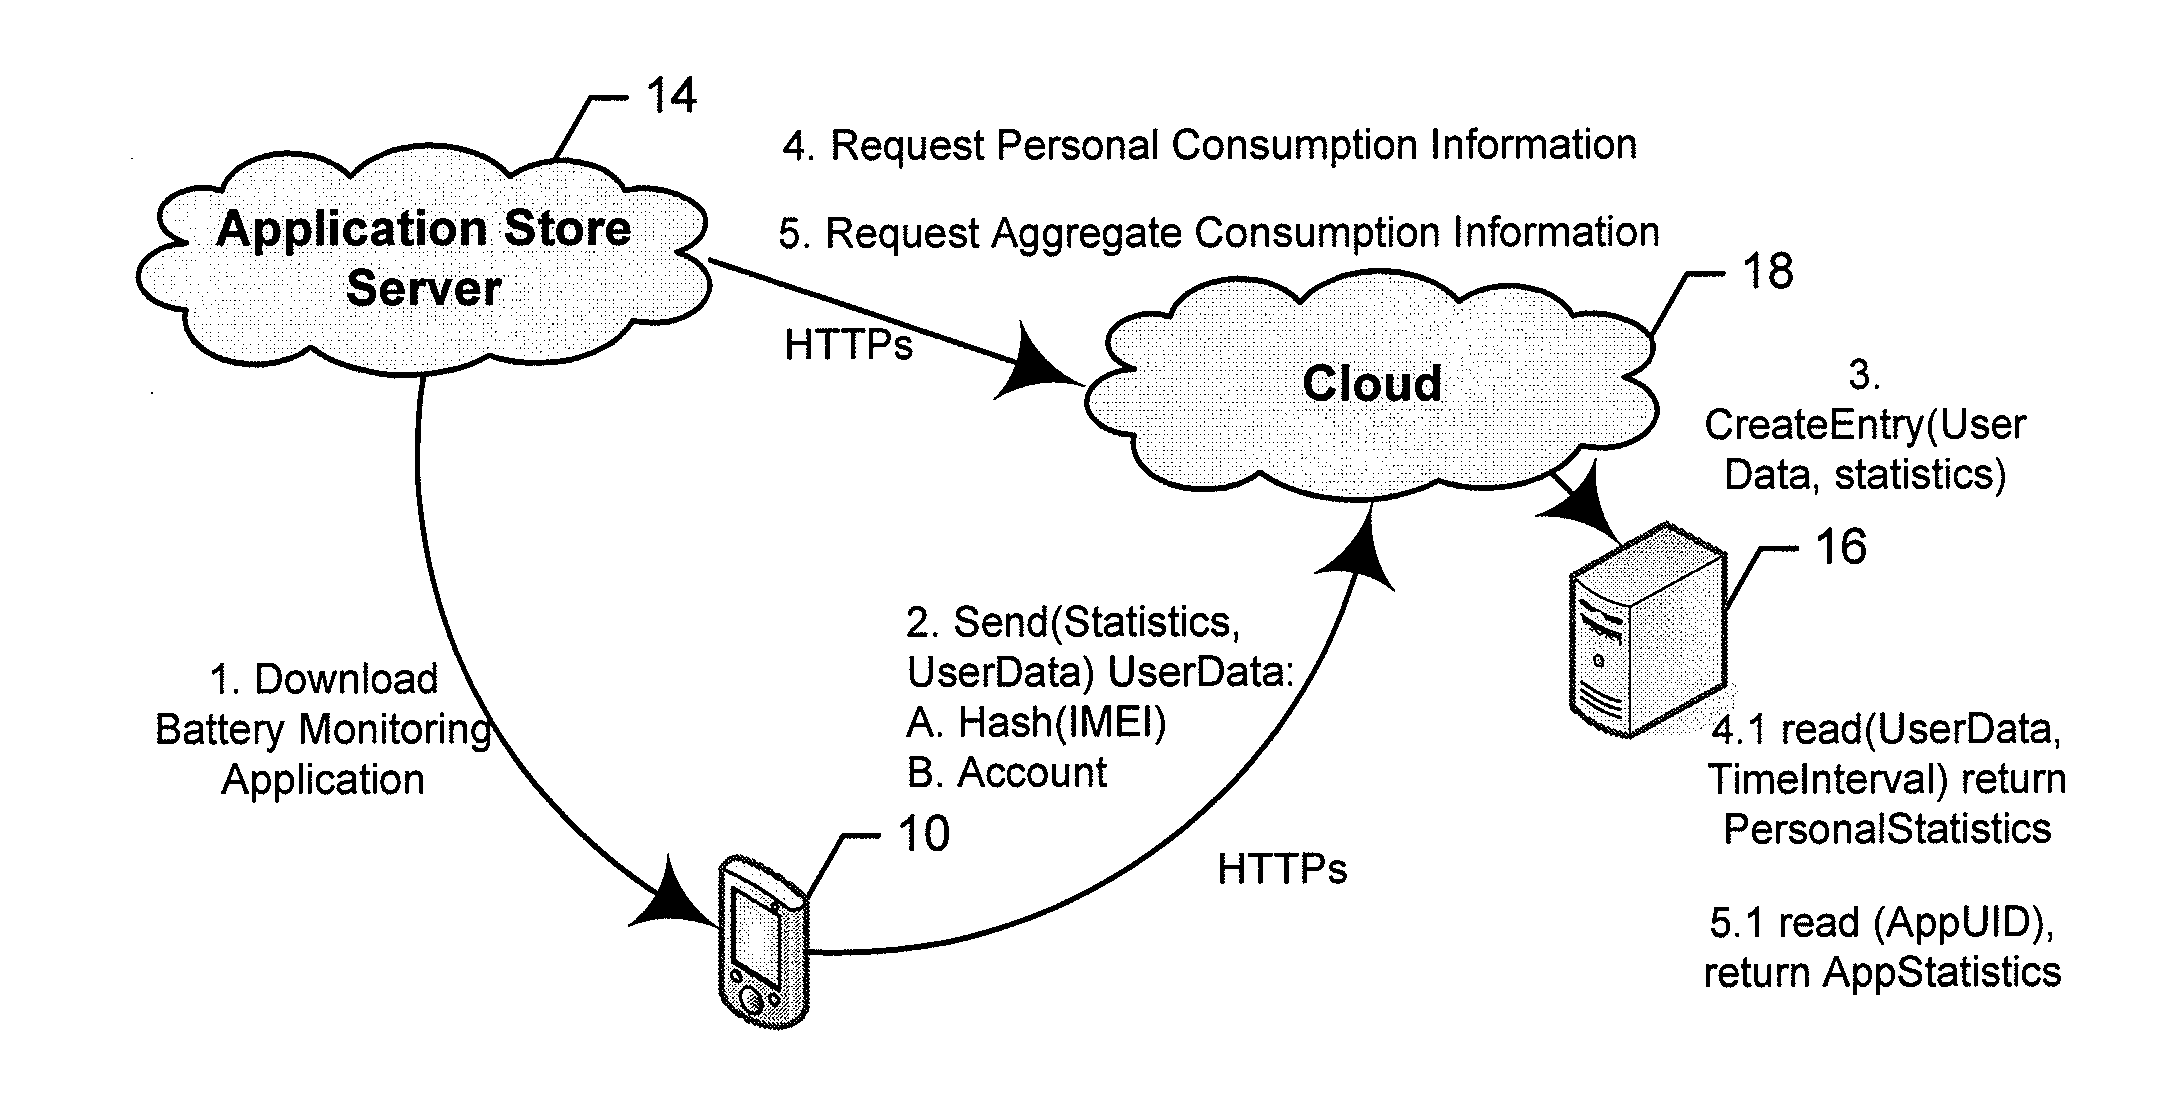 Method and apparatus for providing consumption information for software applications